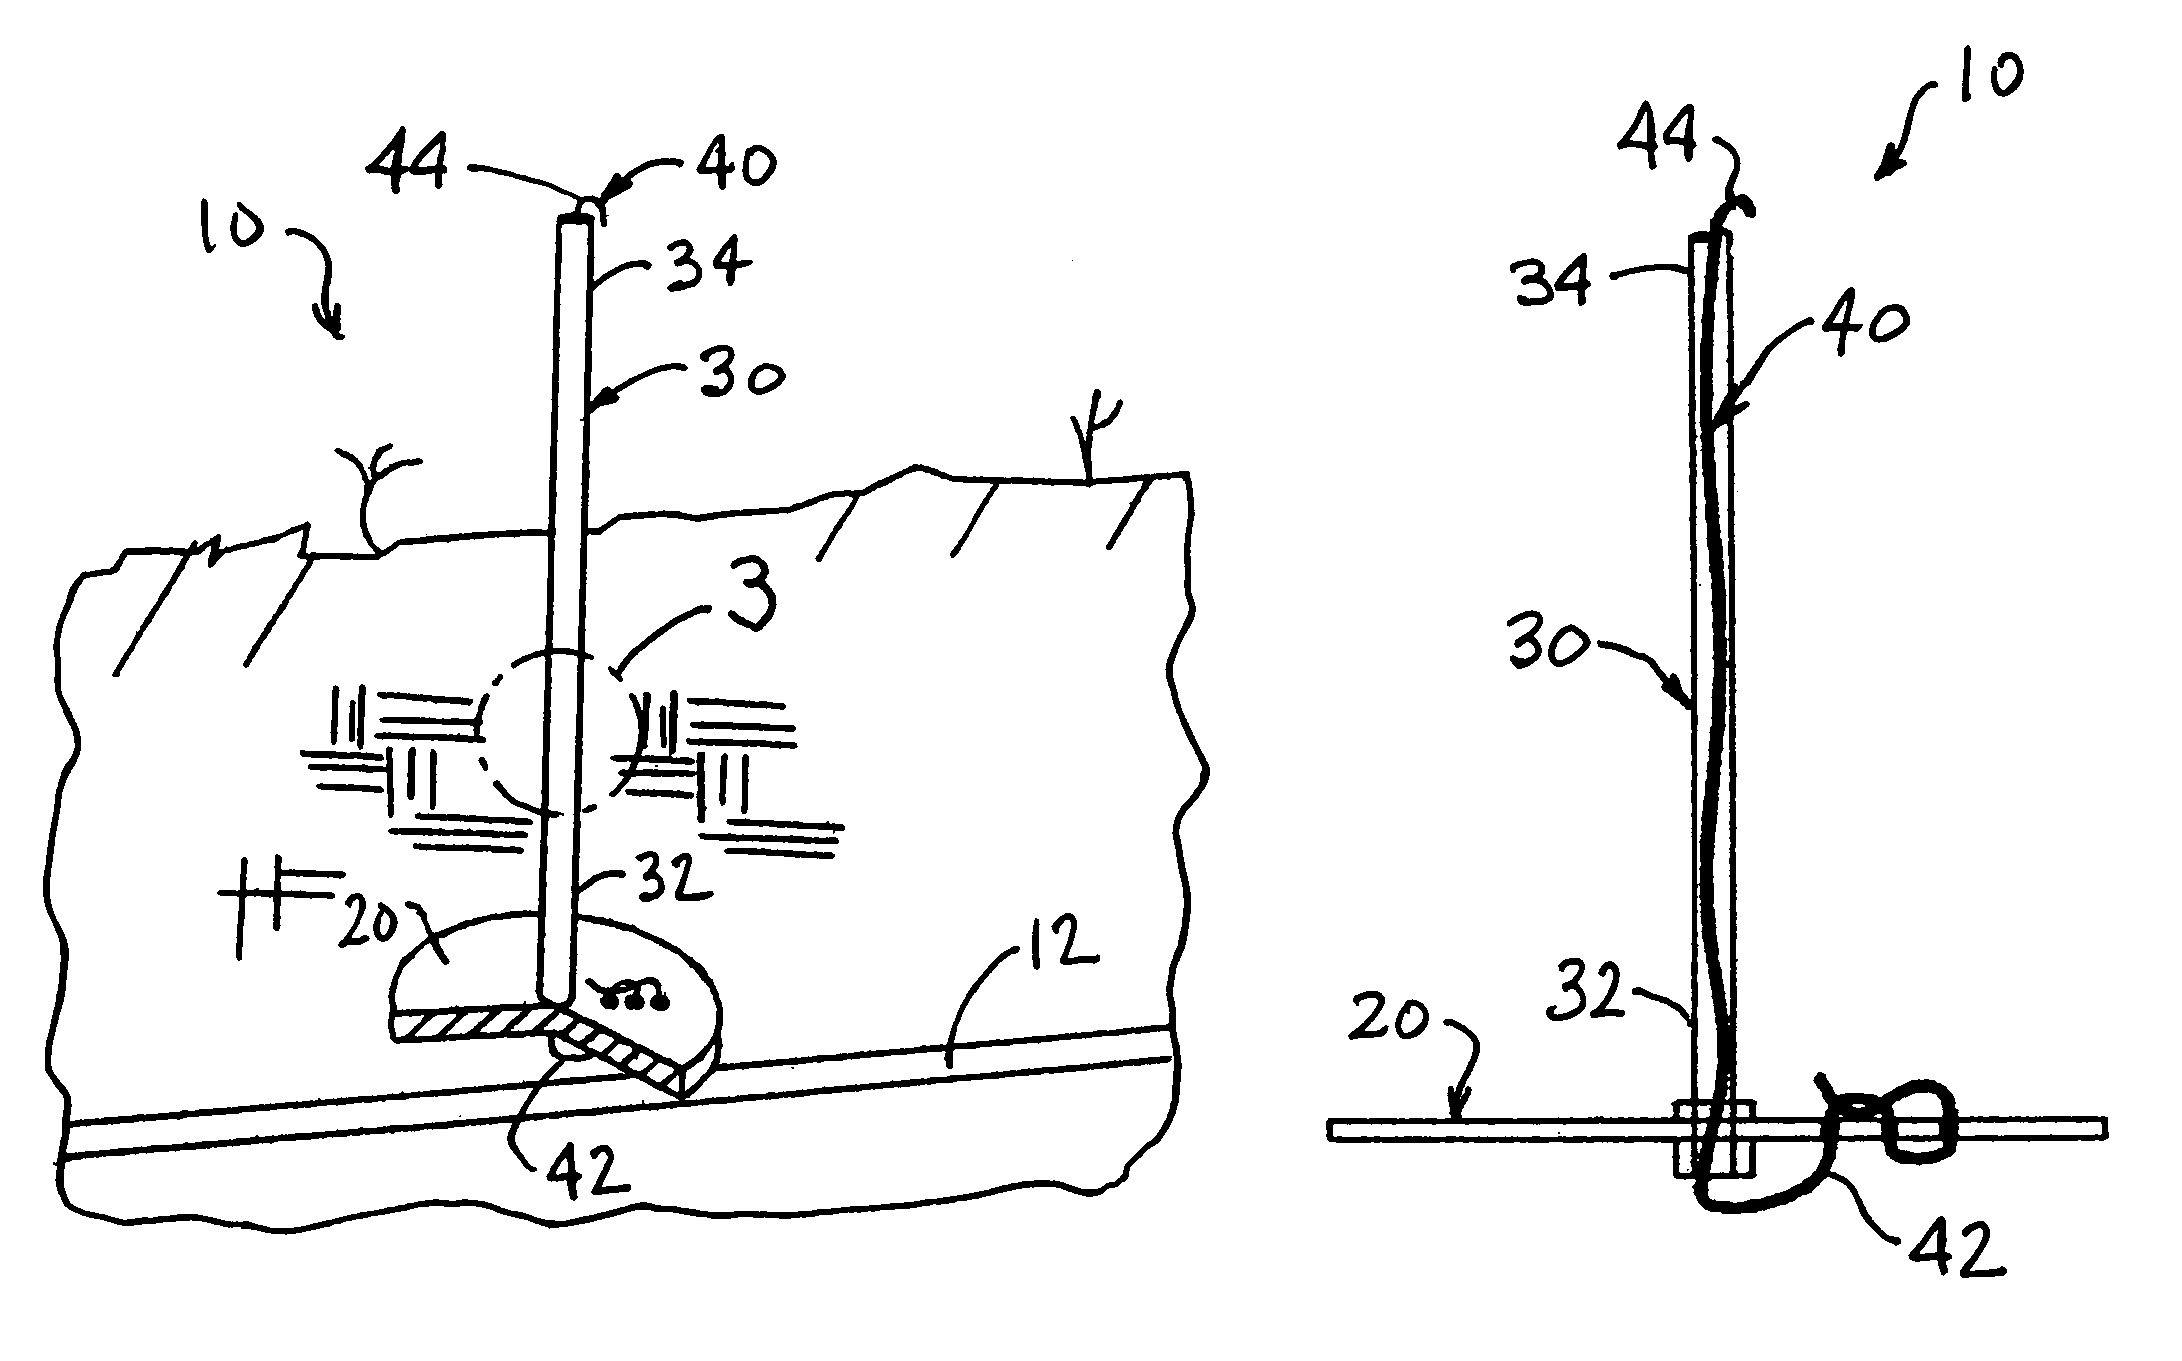 Underground marking systems and methods for identifying a location of an object underground